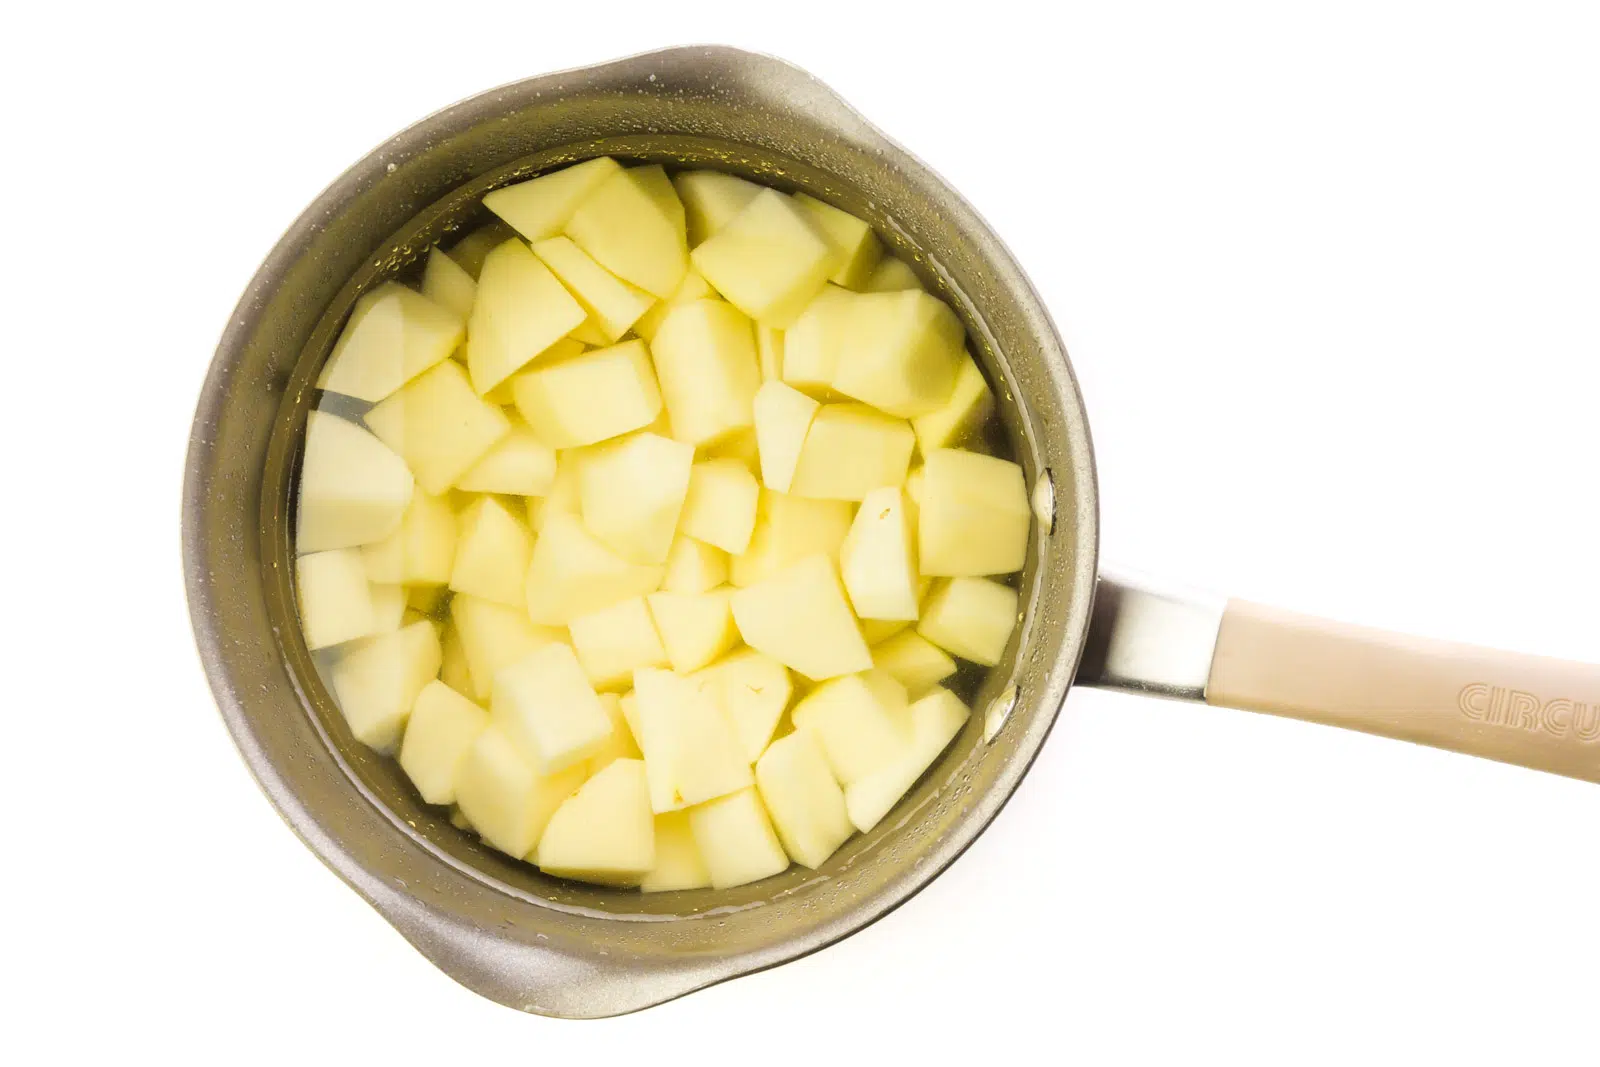 Peeled and chopped potatoes are in a saucepan.